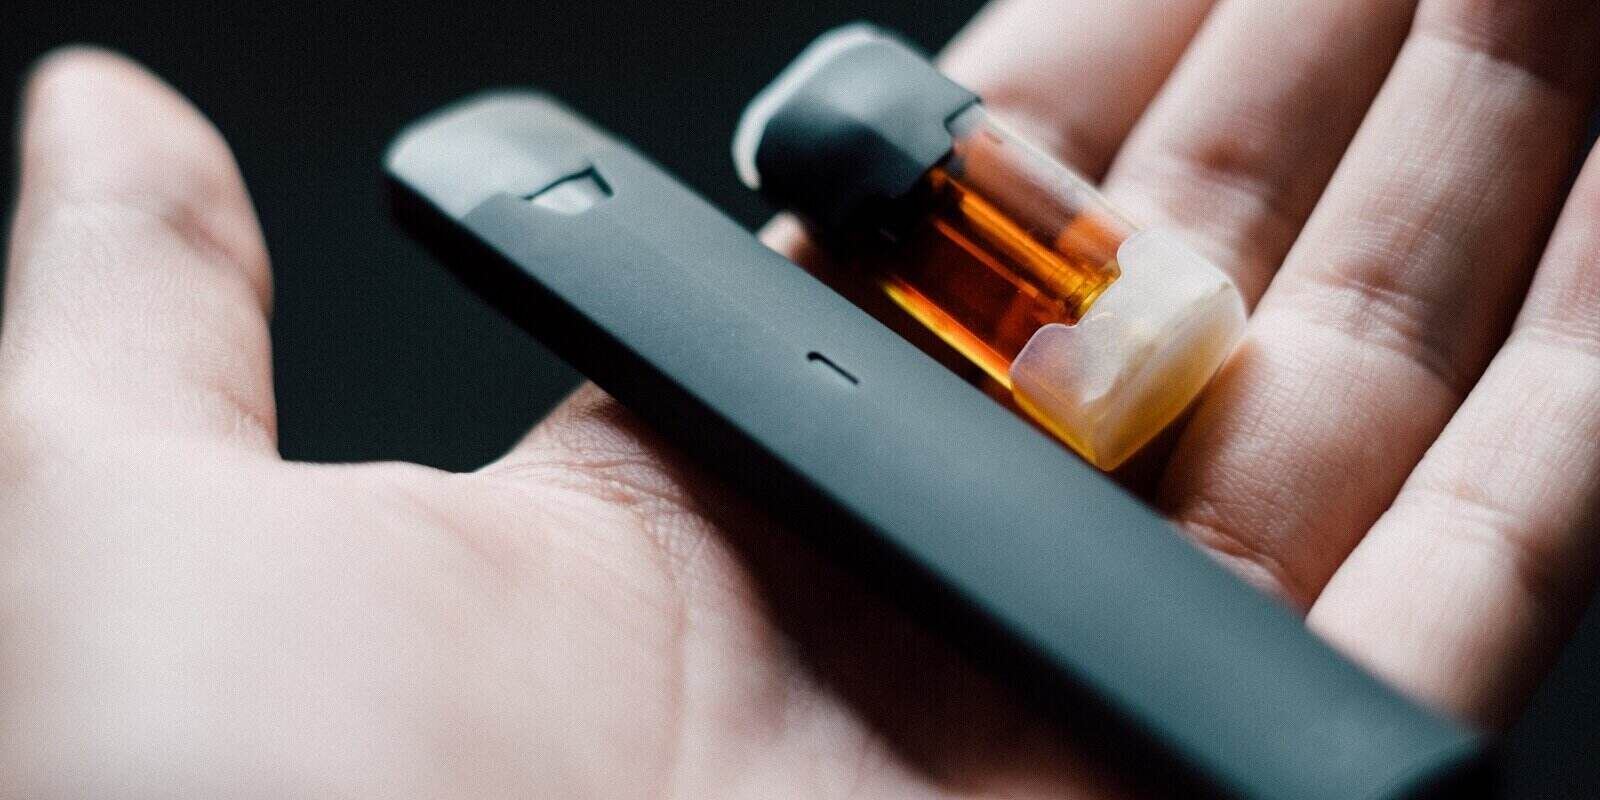 disposable vape pen with refill pod on hand